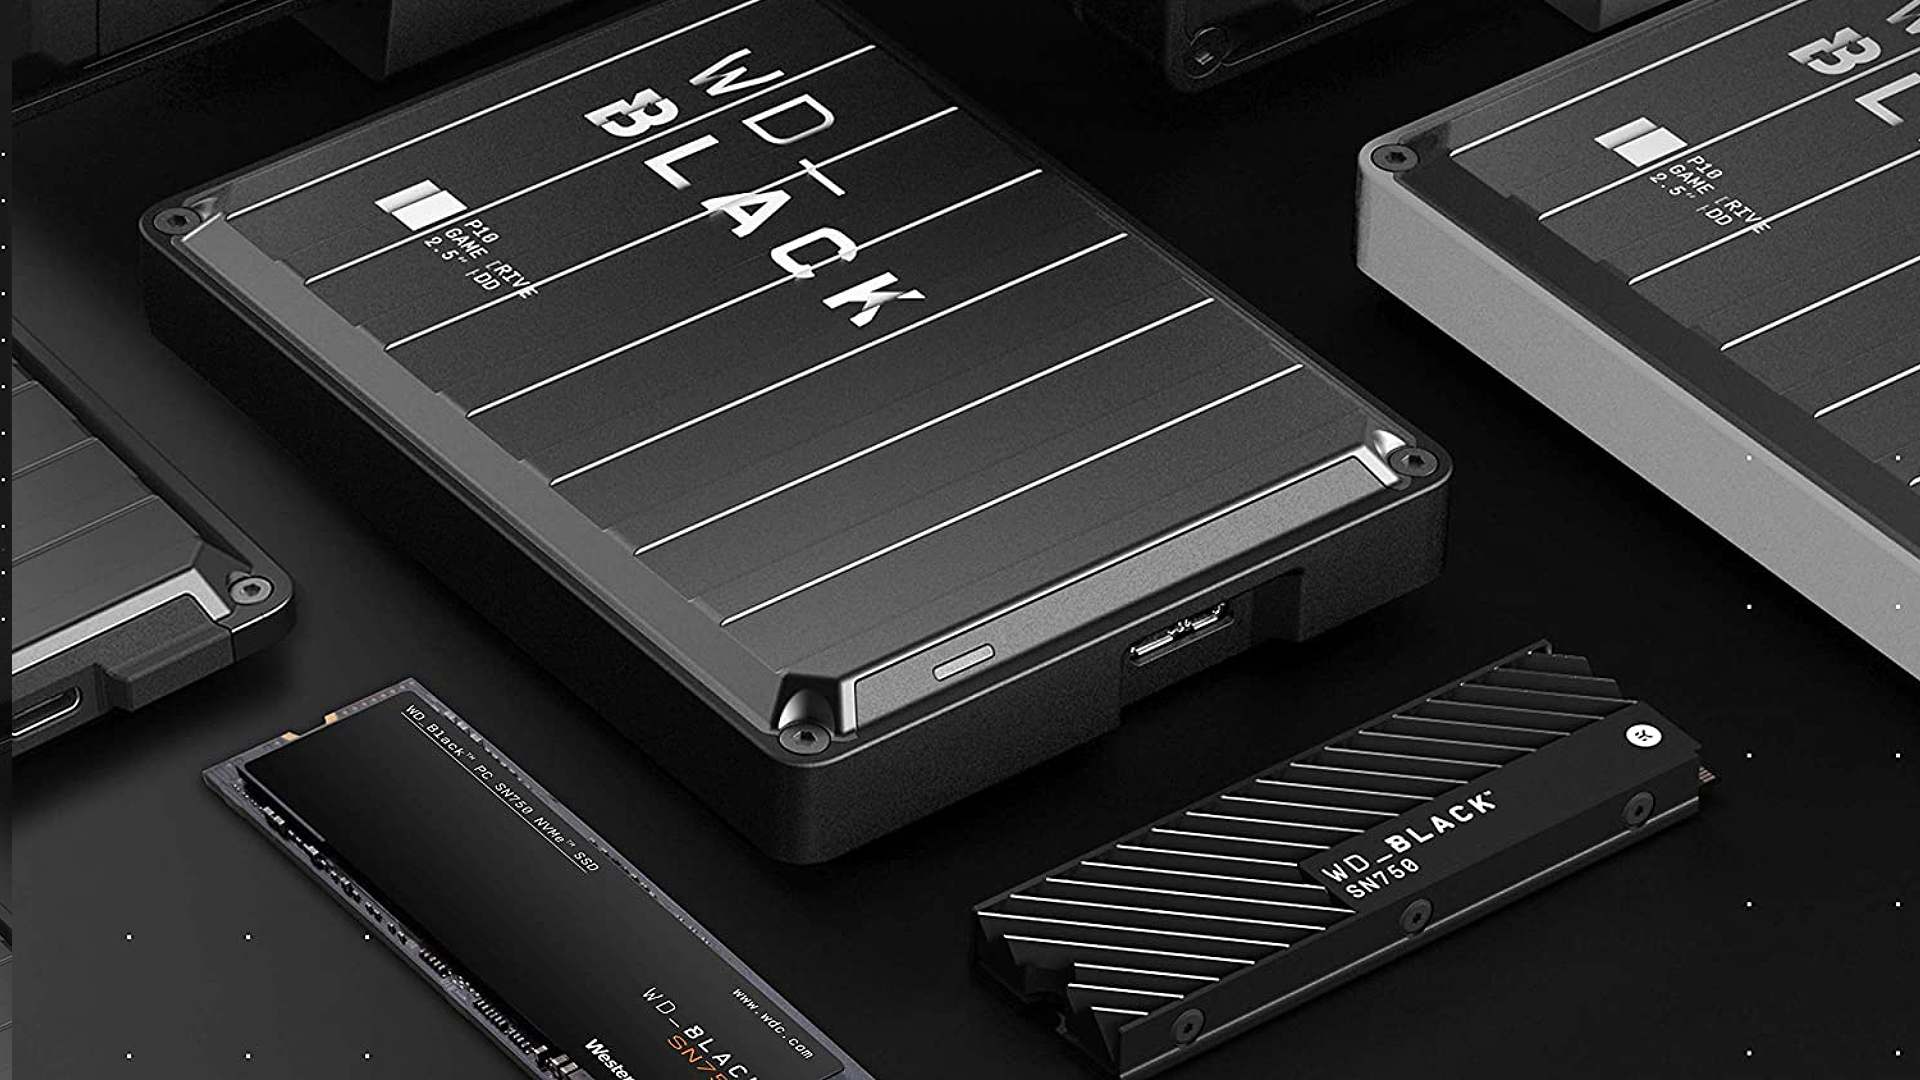 Selection of WD Black SSD options on dark surface